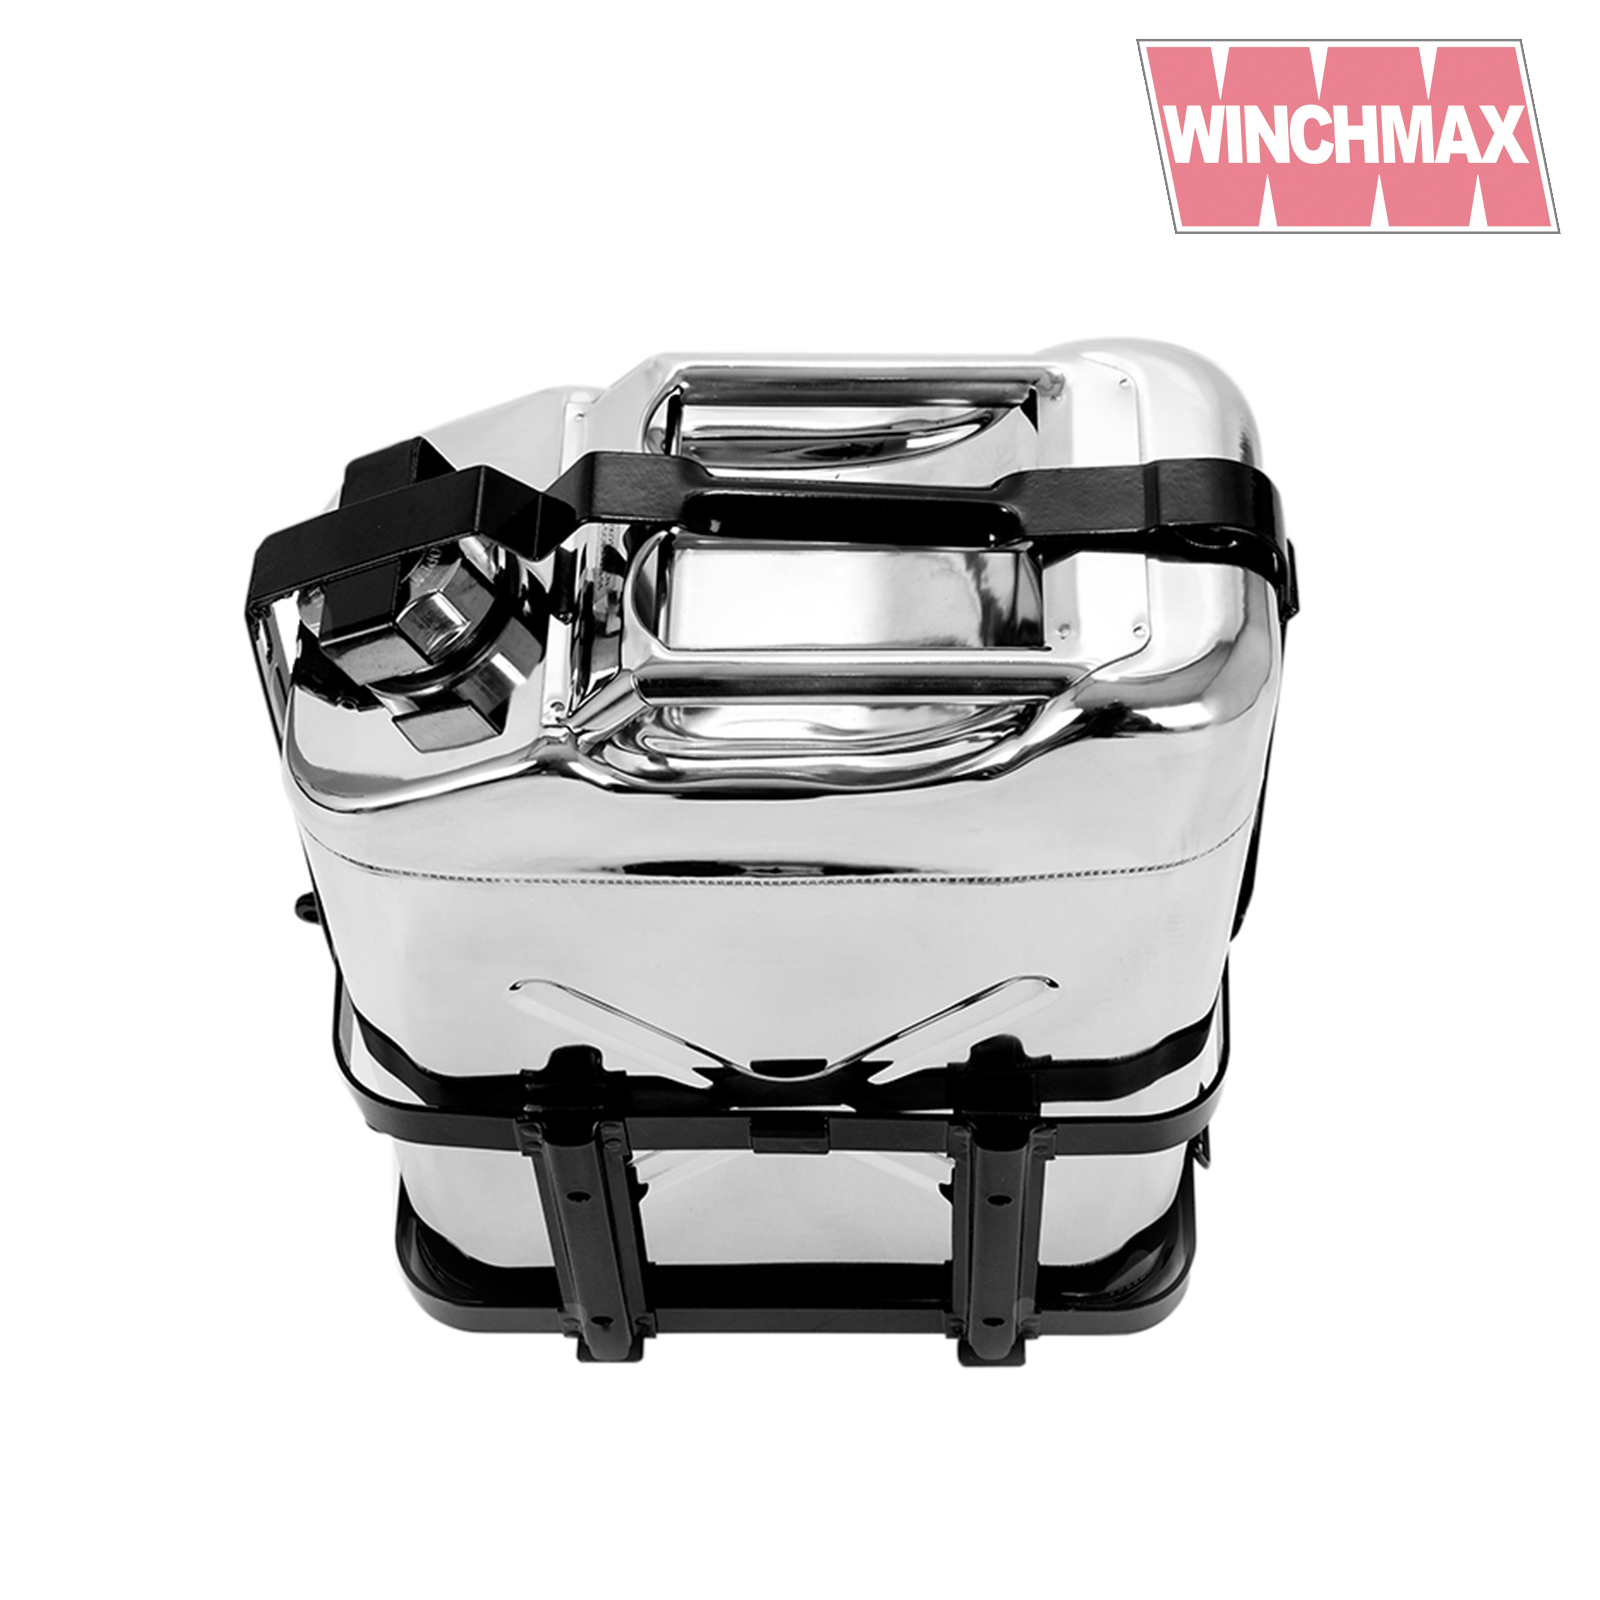 Winchmax Jerry Can Holder/Jerry Can Rack for Centre Pour Cap Only 